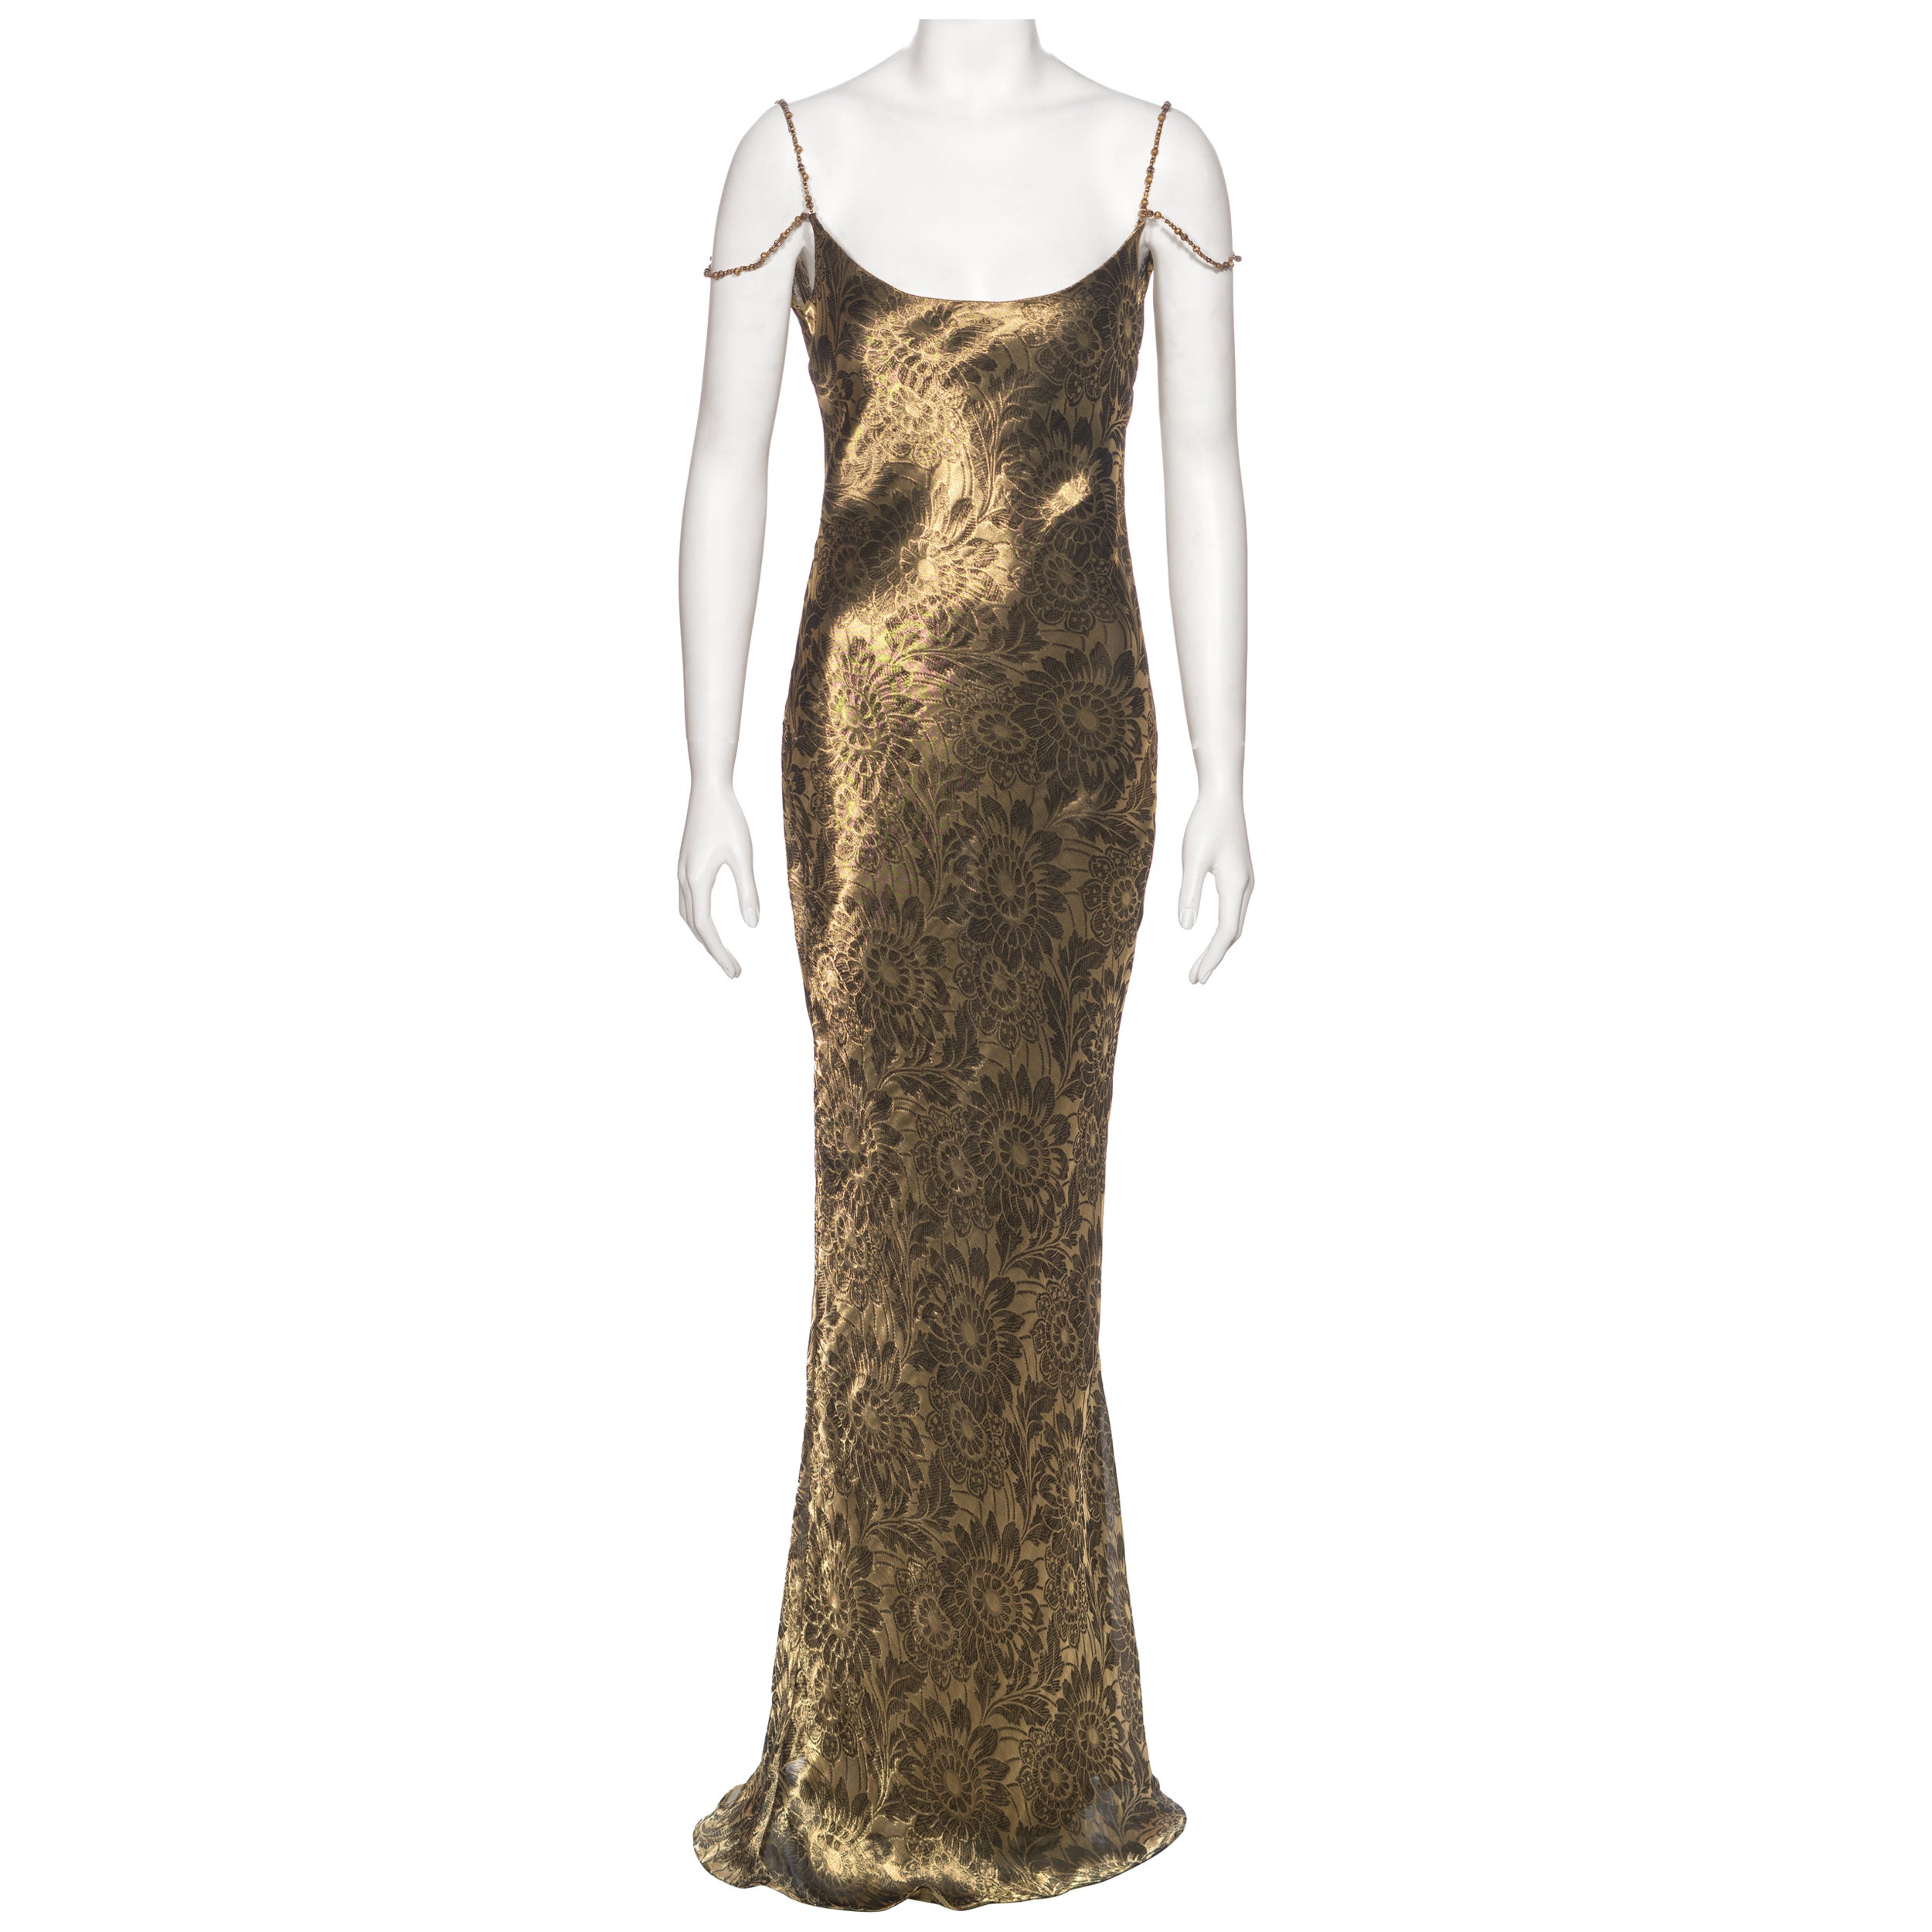 Christian Dior by John Galliano Metallic Antique Gold Evening Dress, FW 1998 For Sale